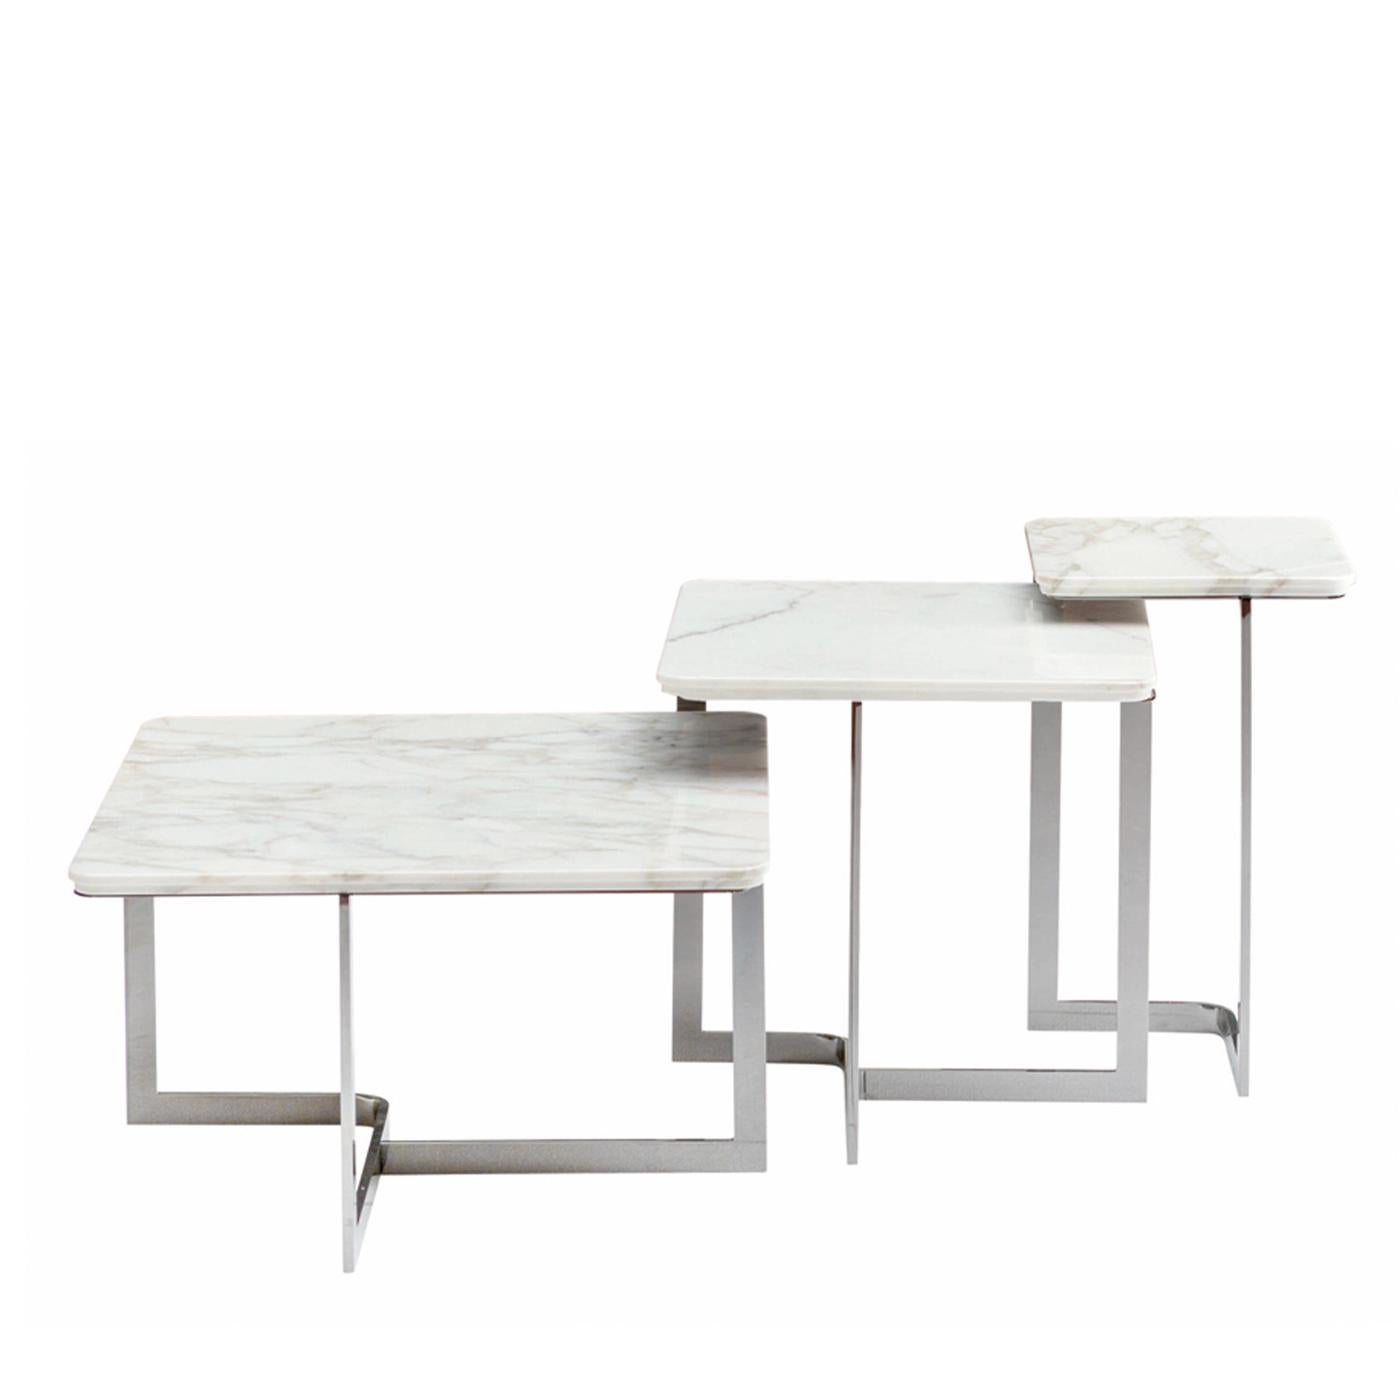 With a pristine design, the Yoshi coffee and side tables are highly functional adding style and class to compliment any contemporary decor in your living area. The tables can be utilized separately or tucked slightly under one another for a more